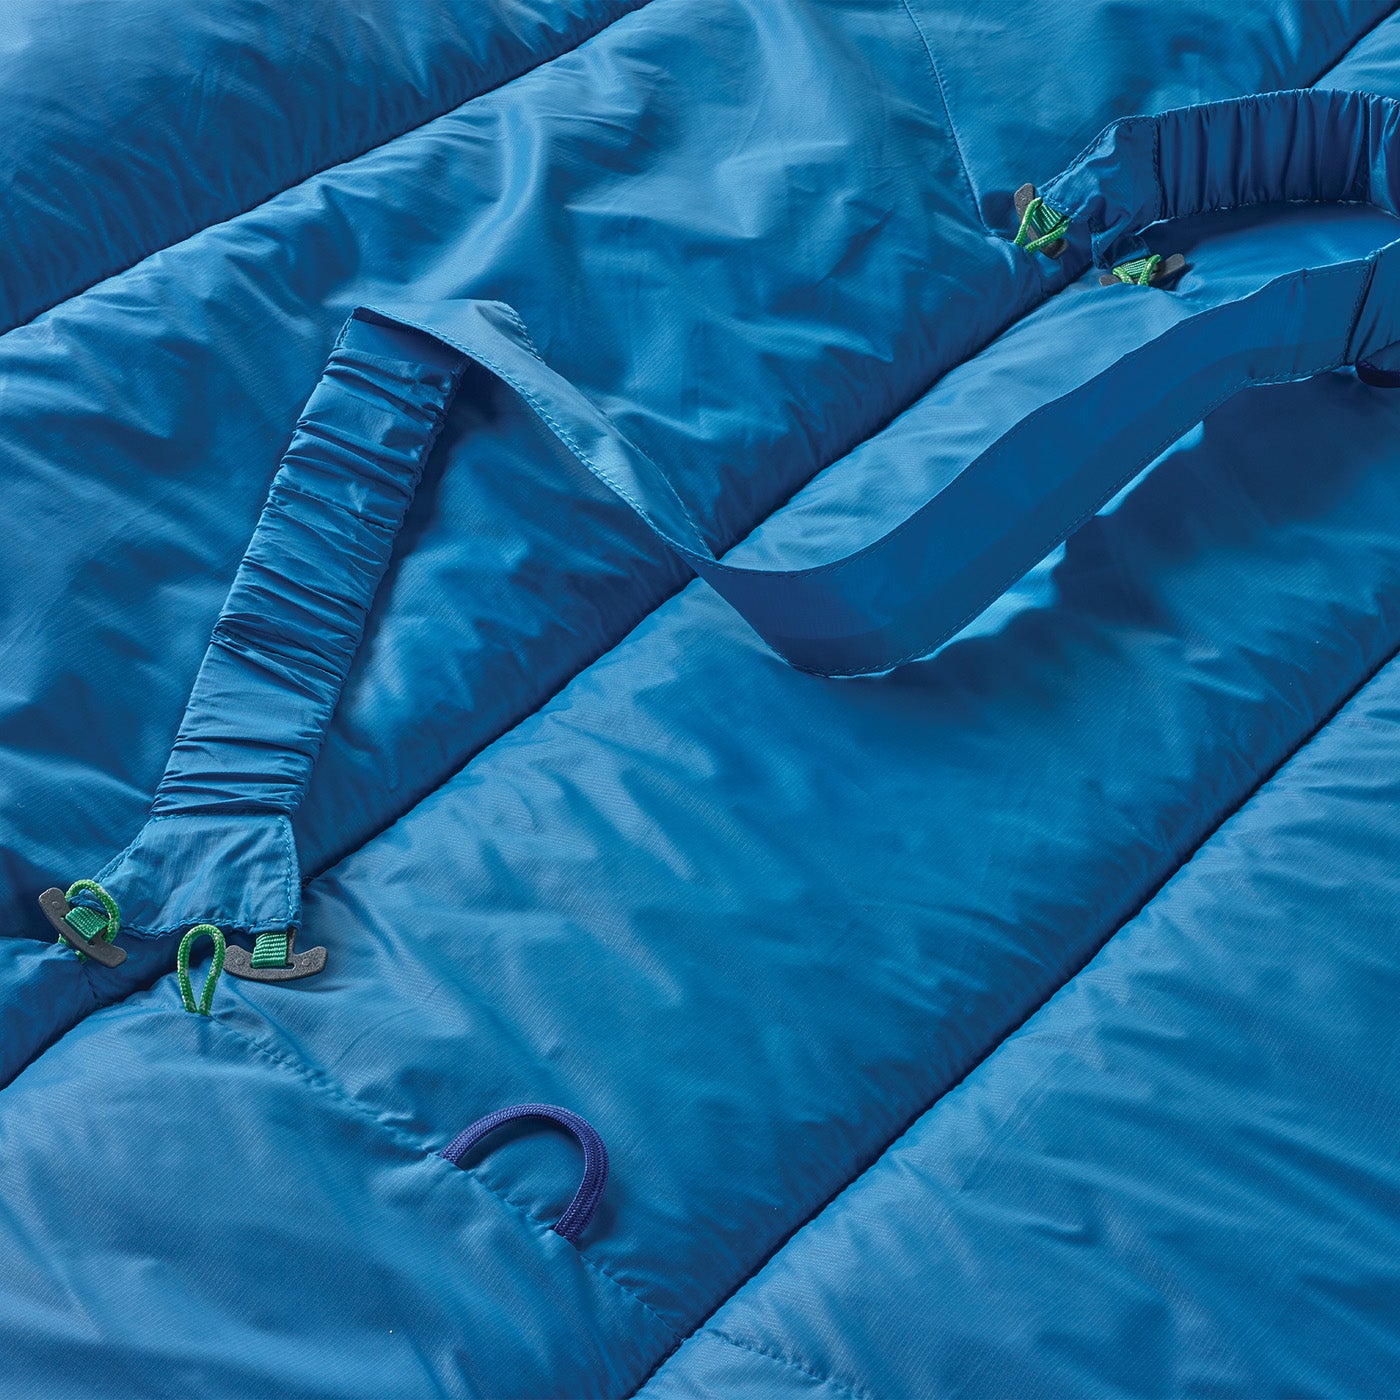 thermarest_space_cowboy_04